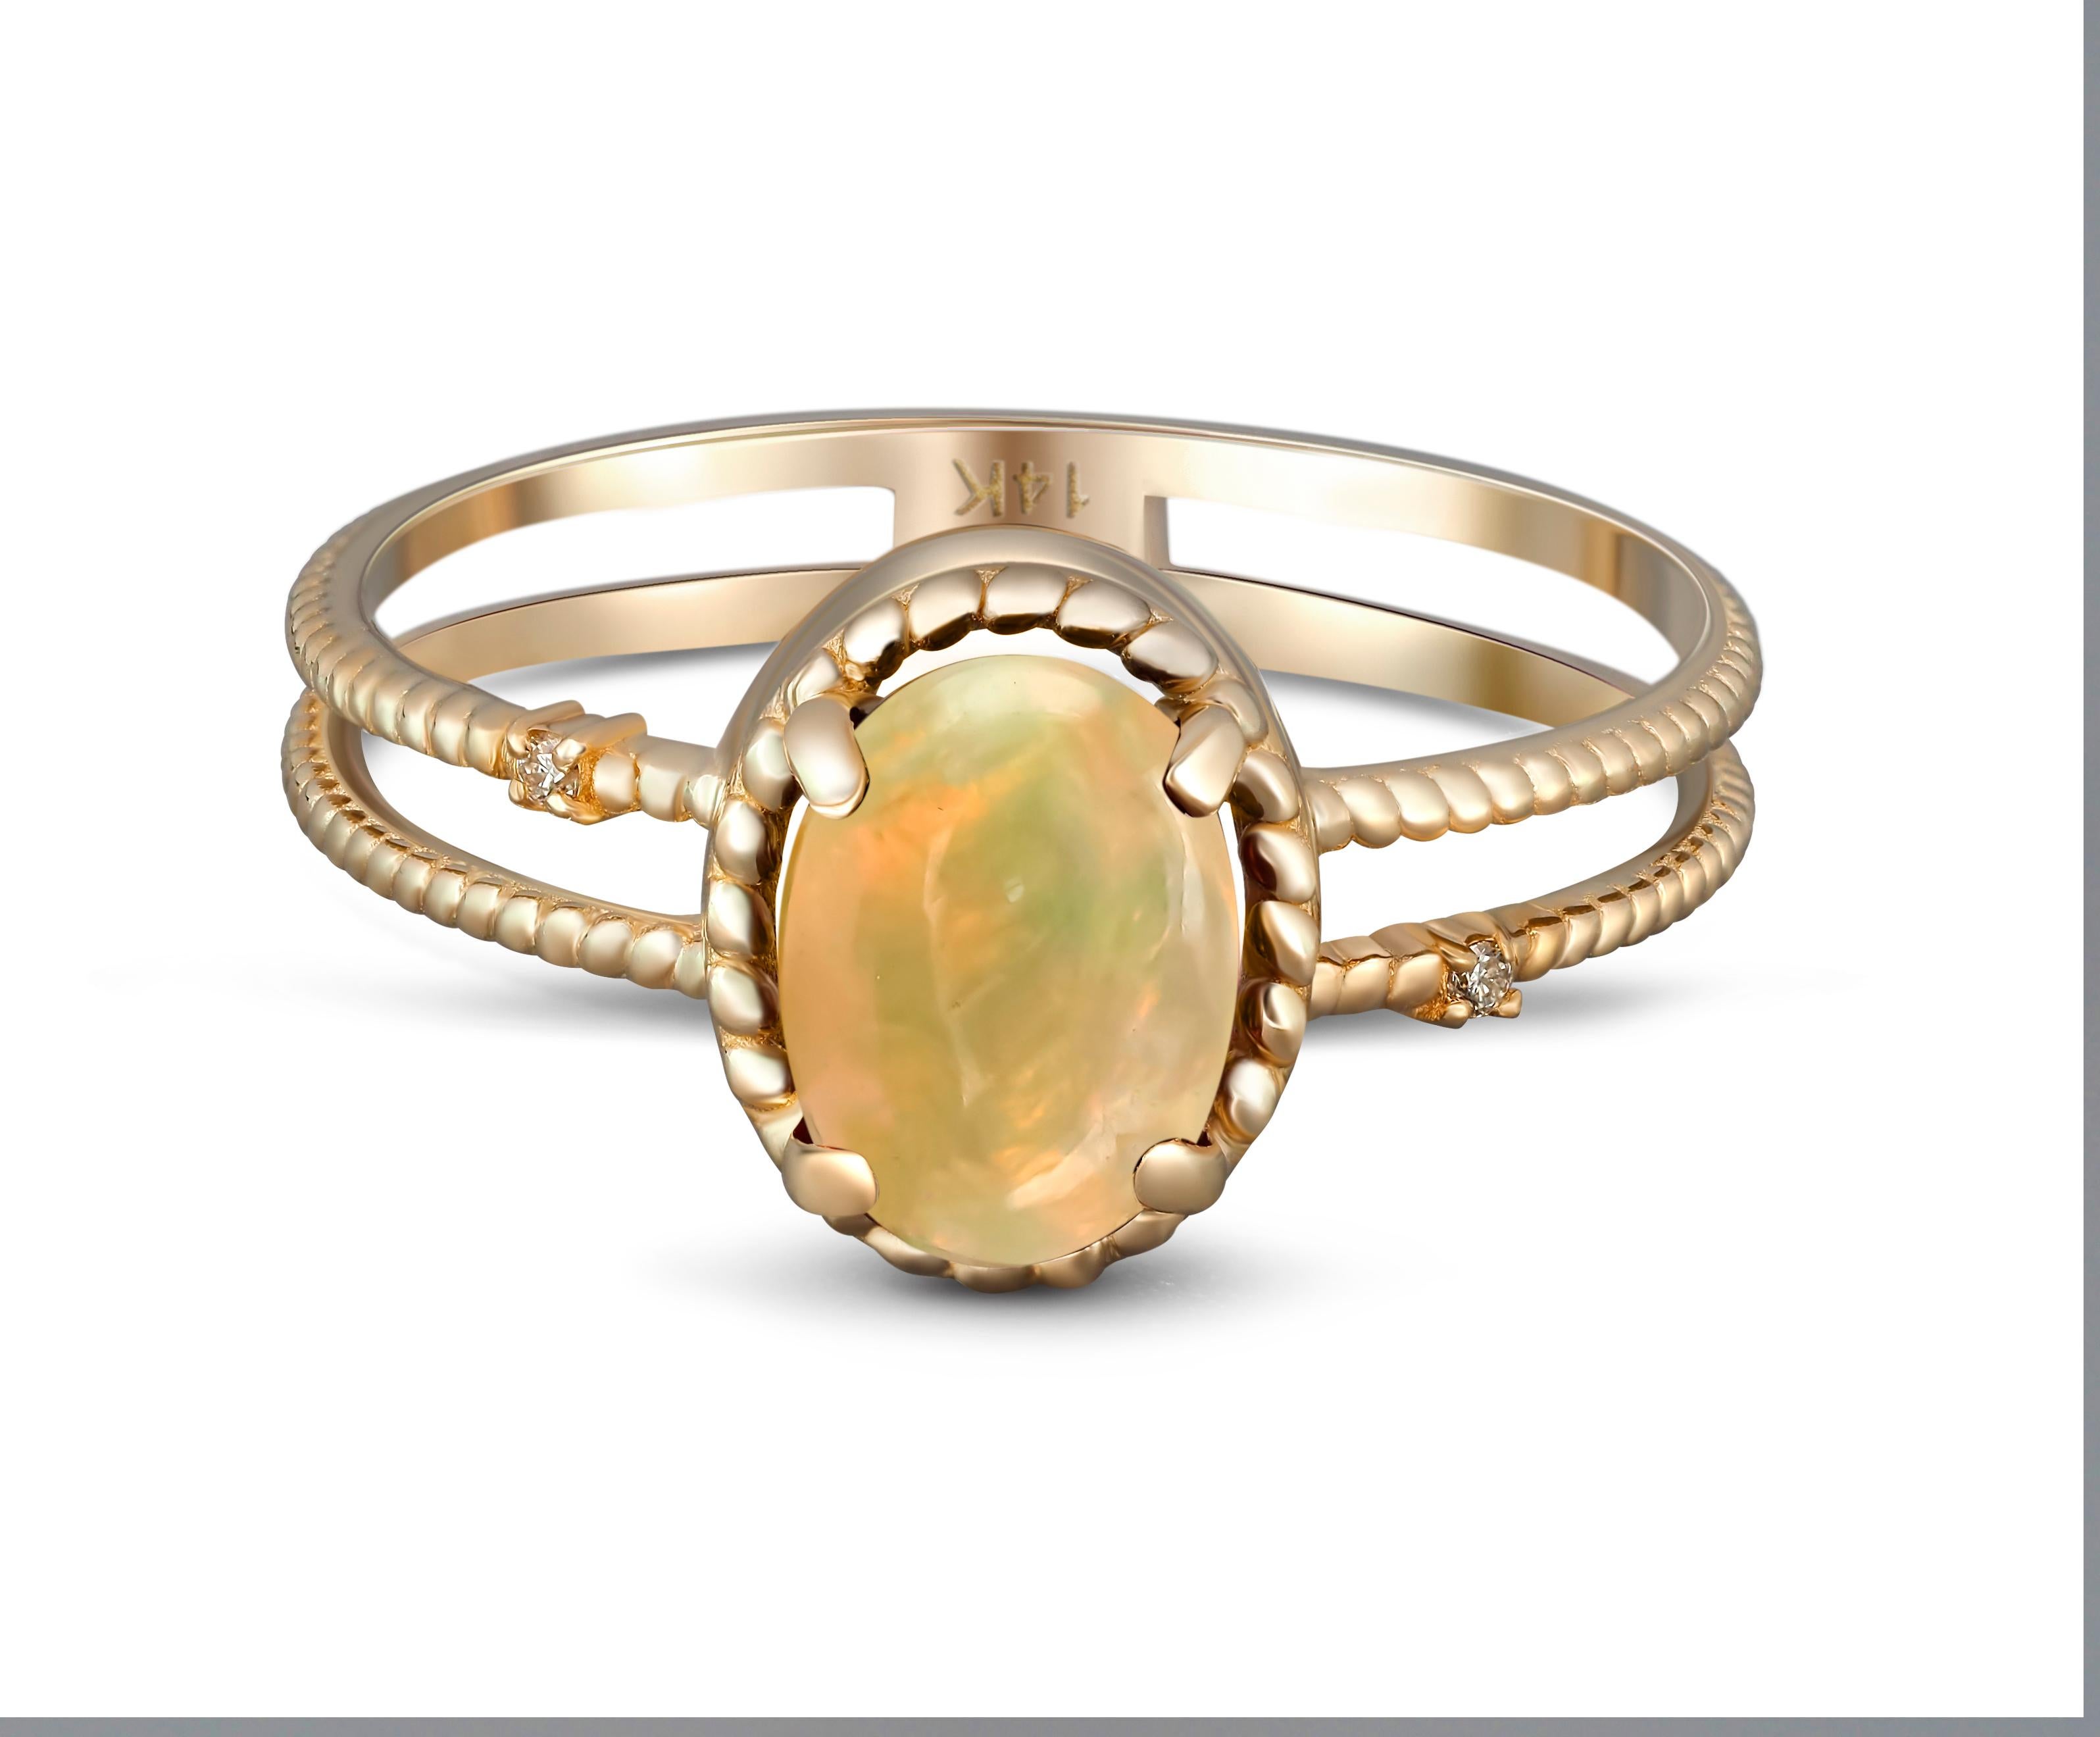 Cabochon opal 14k gold ring. 
Gold ring with Opal. Minimalist opal ring. Opal engagement ring. Opal promise ring. Opal Birthstone Ring.

Metal: 14k gold
Weight: 1.8  g. depends from size.

Central stone: natural Opal
Weight -  approx 1 ct in total,